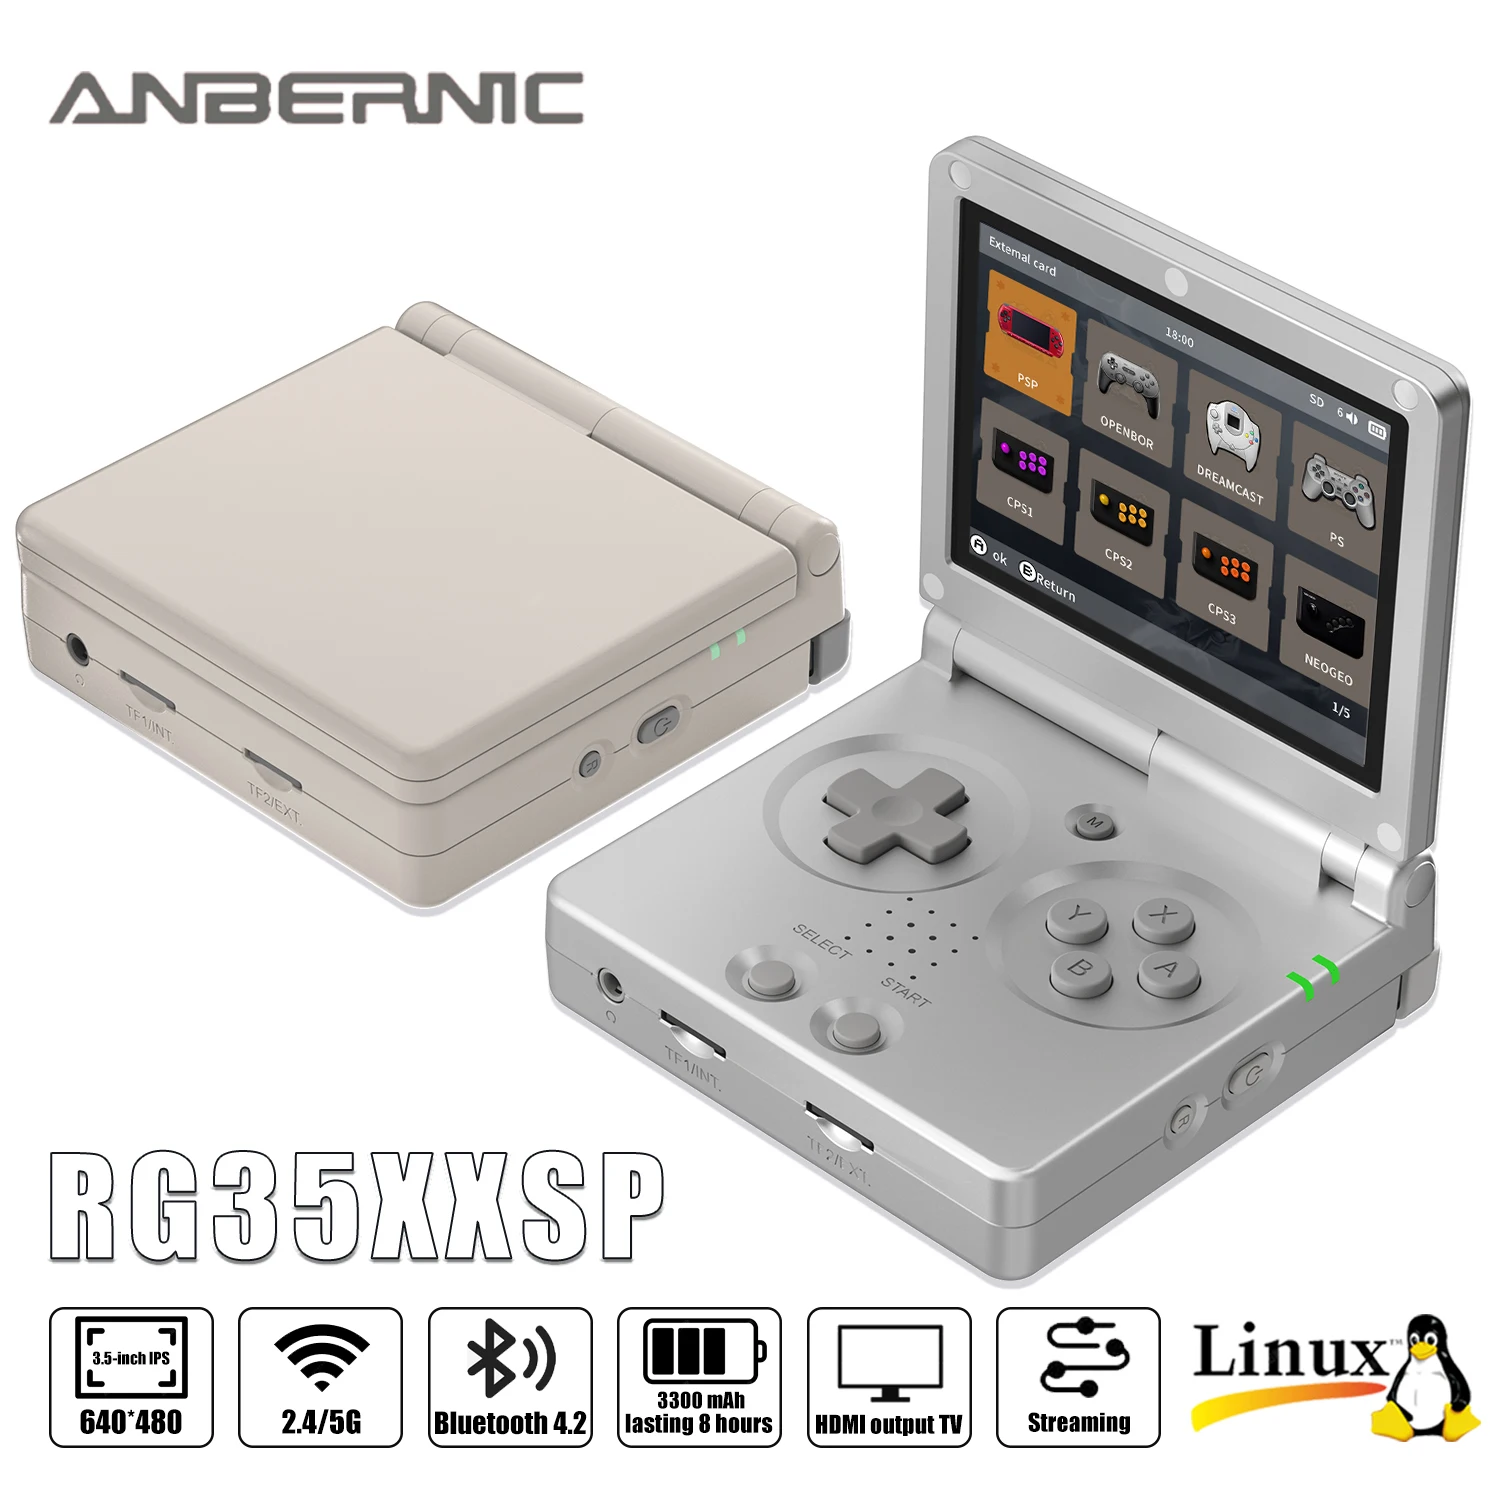 ANBERNIC RG35XXSP 3.5'' IPS Screen Flip Handheld Console Linux System HDMI-compatible TV Output  64G 5500 Games Pre-installed